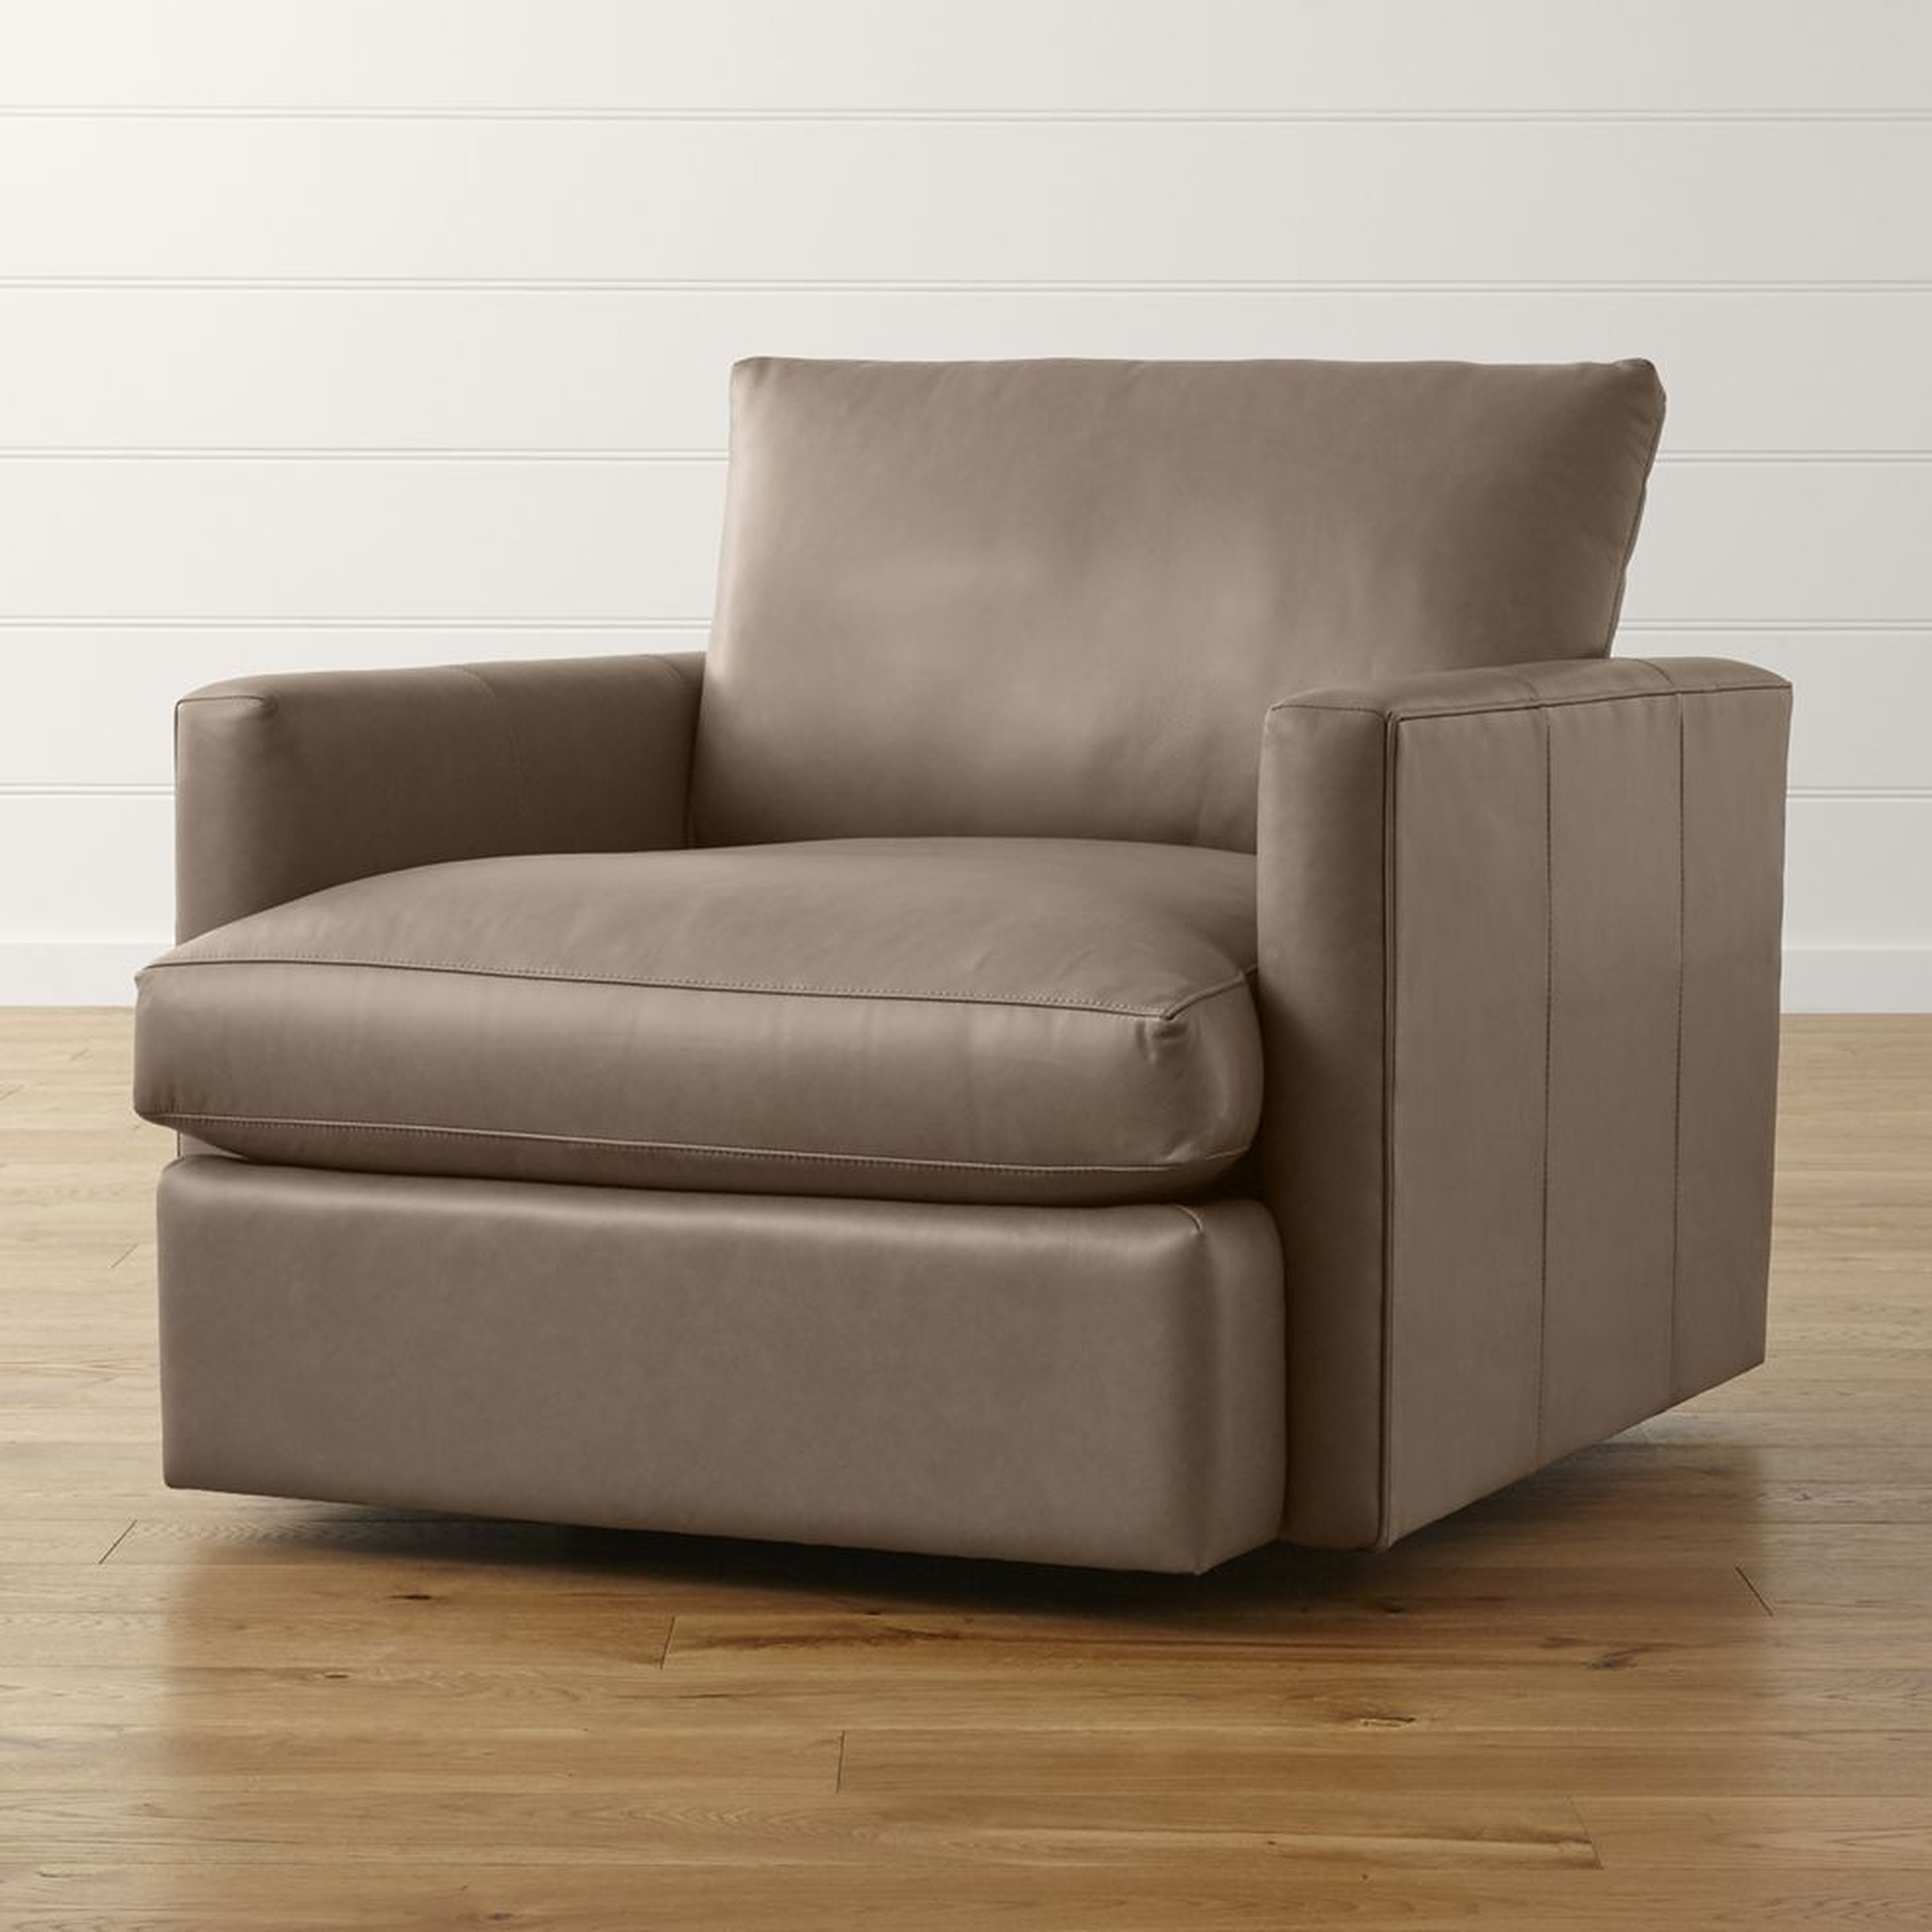 Lounge II Petite Leather Swivel Chair - Crate and Barrel